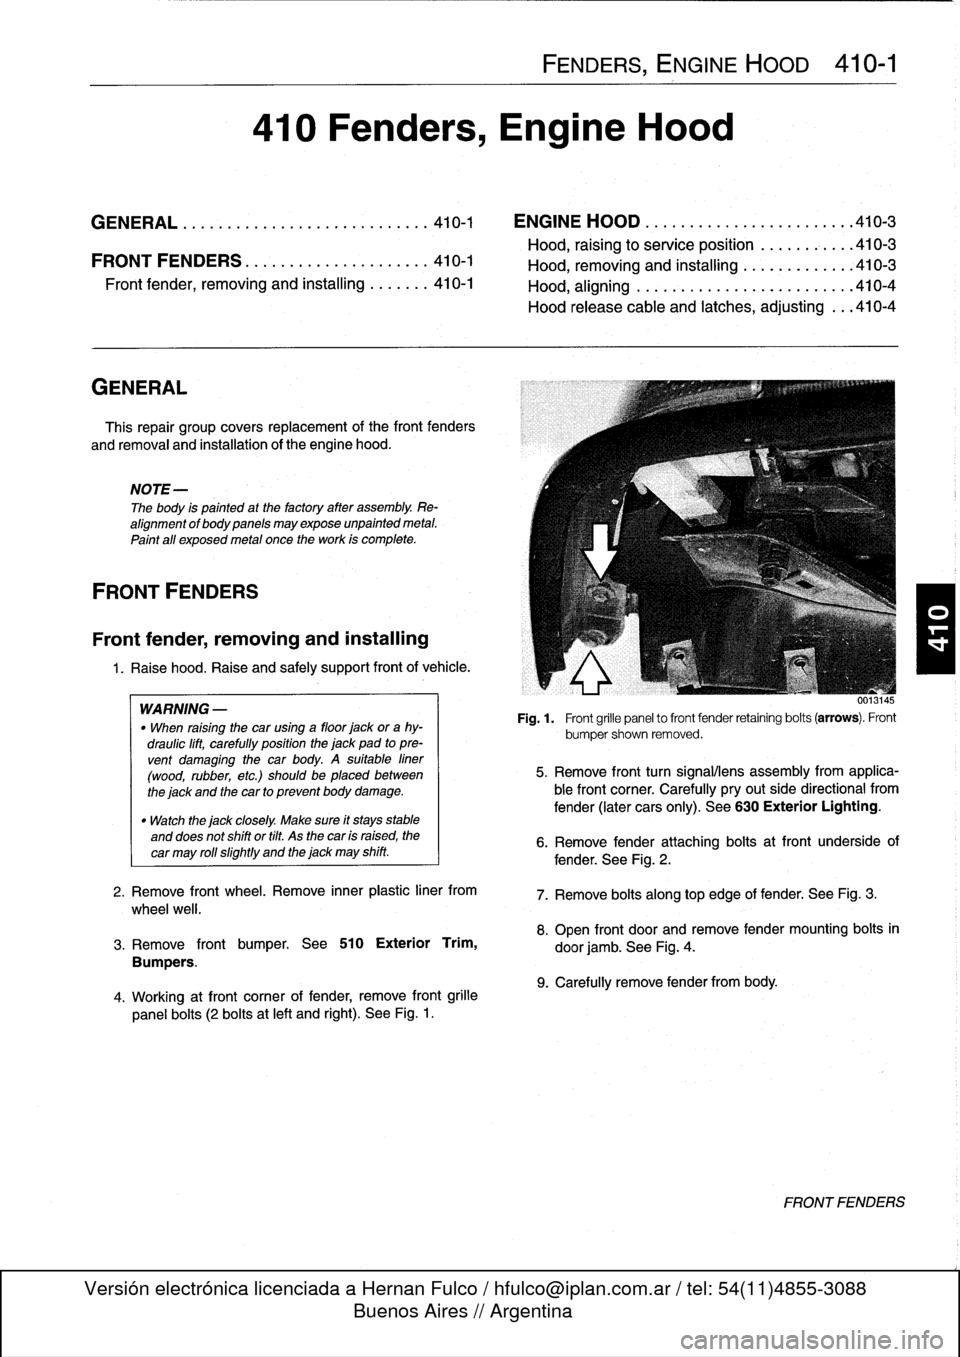 BMW 318i 1997 E36 Workshop Manual 
GENERAL

This
repair
group
covers
replacement
of
the
front
fenders

and
removal
and
installation
of
the
engine
hood
.

NOTE-

The
body
is
painted
at
the
factoryafter
assembly
.
Re-
alignment
of
body
